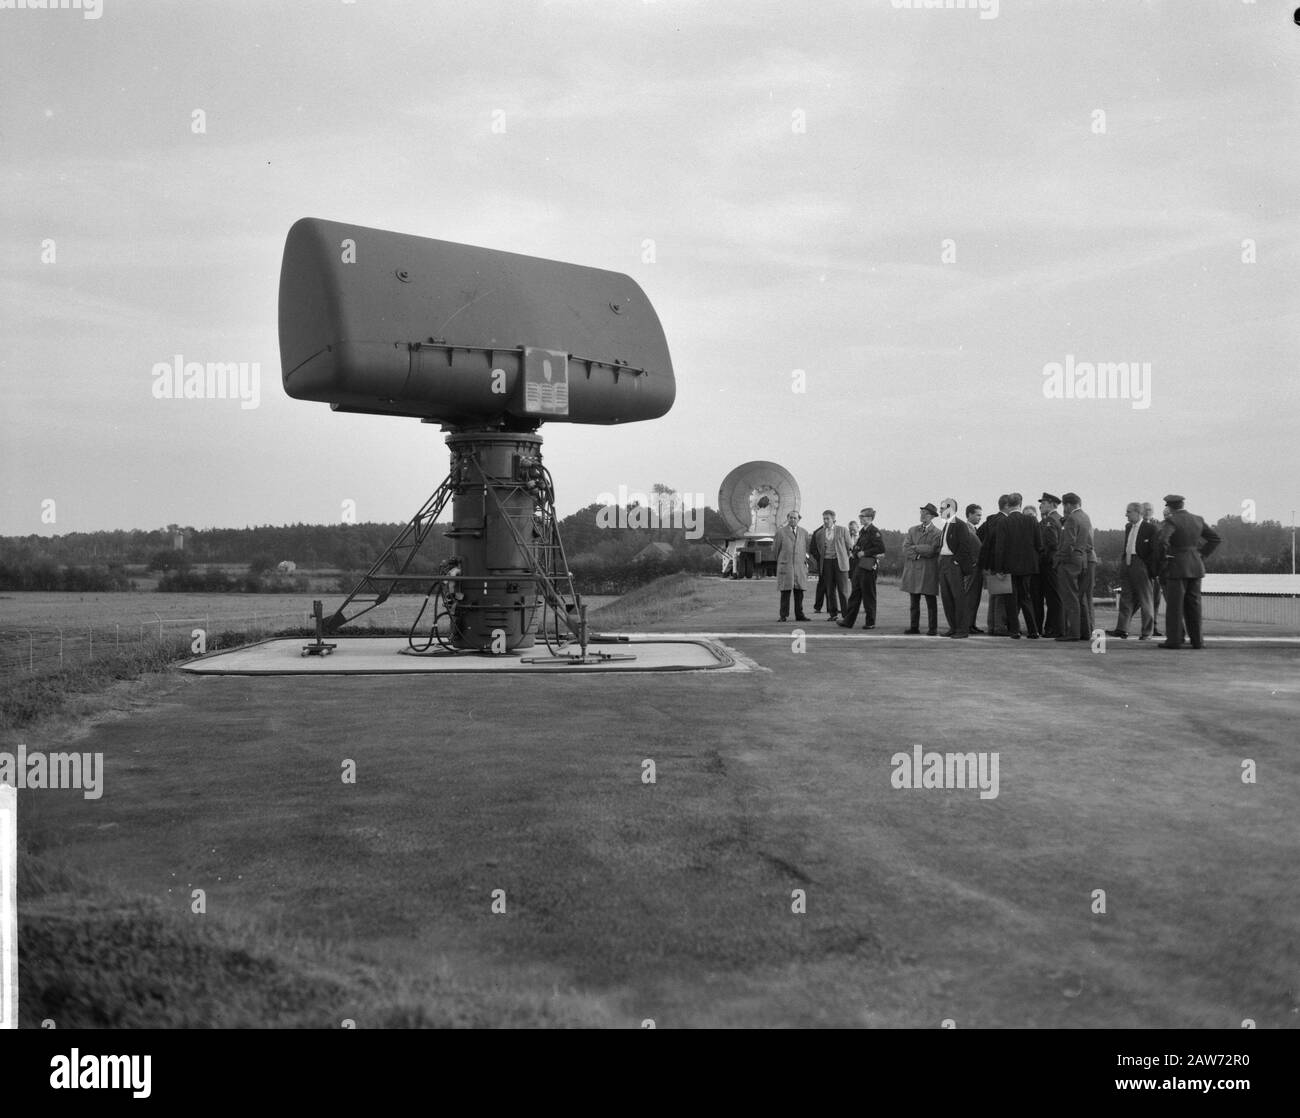 Missiles nike hercules Black and White Stock Photos & Images - Alamy